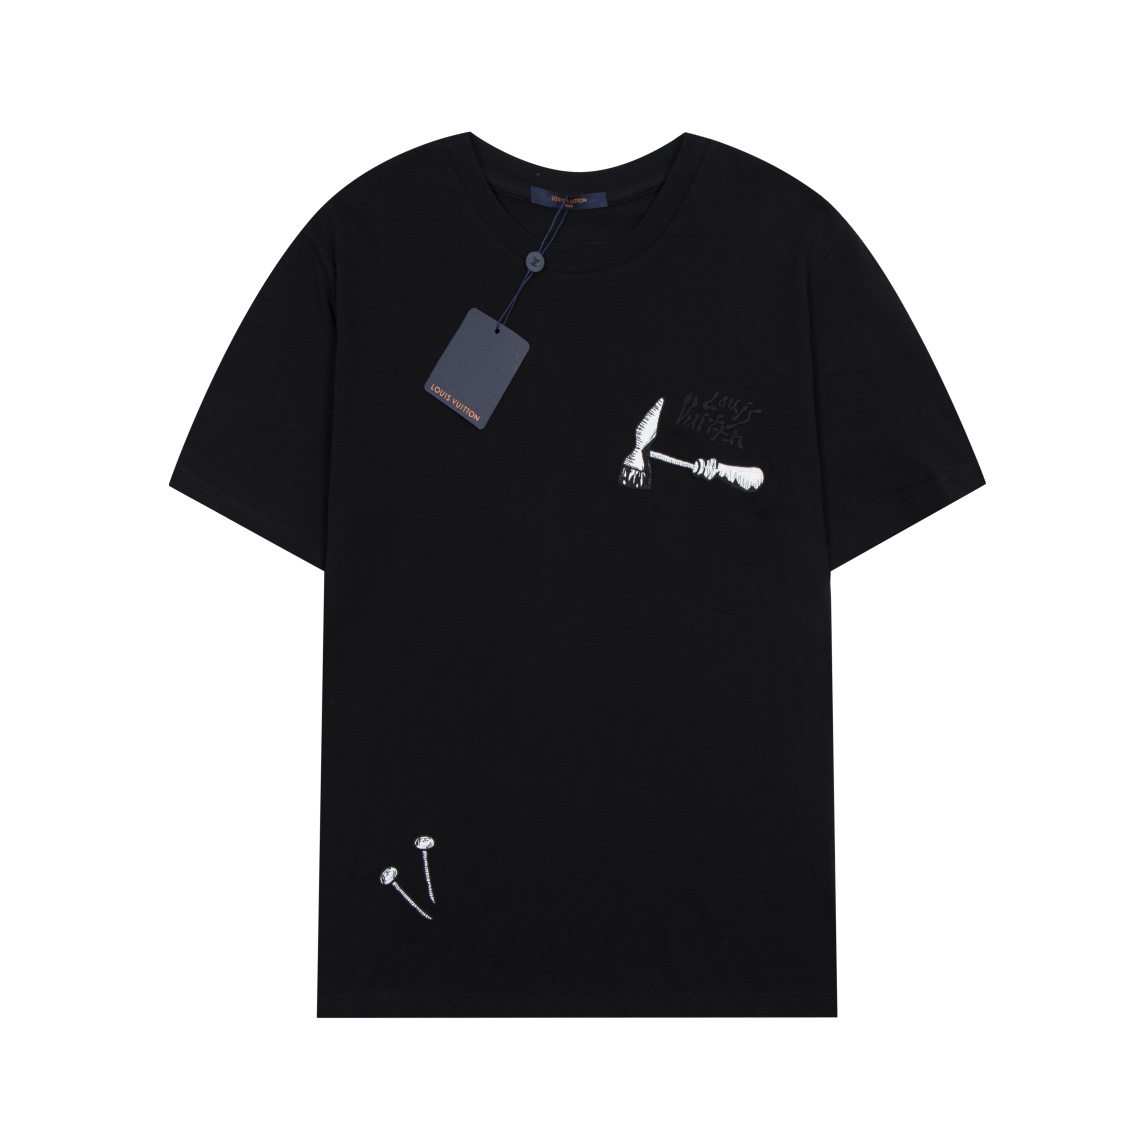 Louis Vuitton Clothing T-Shirt Black Blue White Embroidery Unisex Spring/Summer Collection